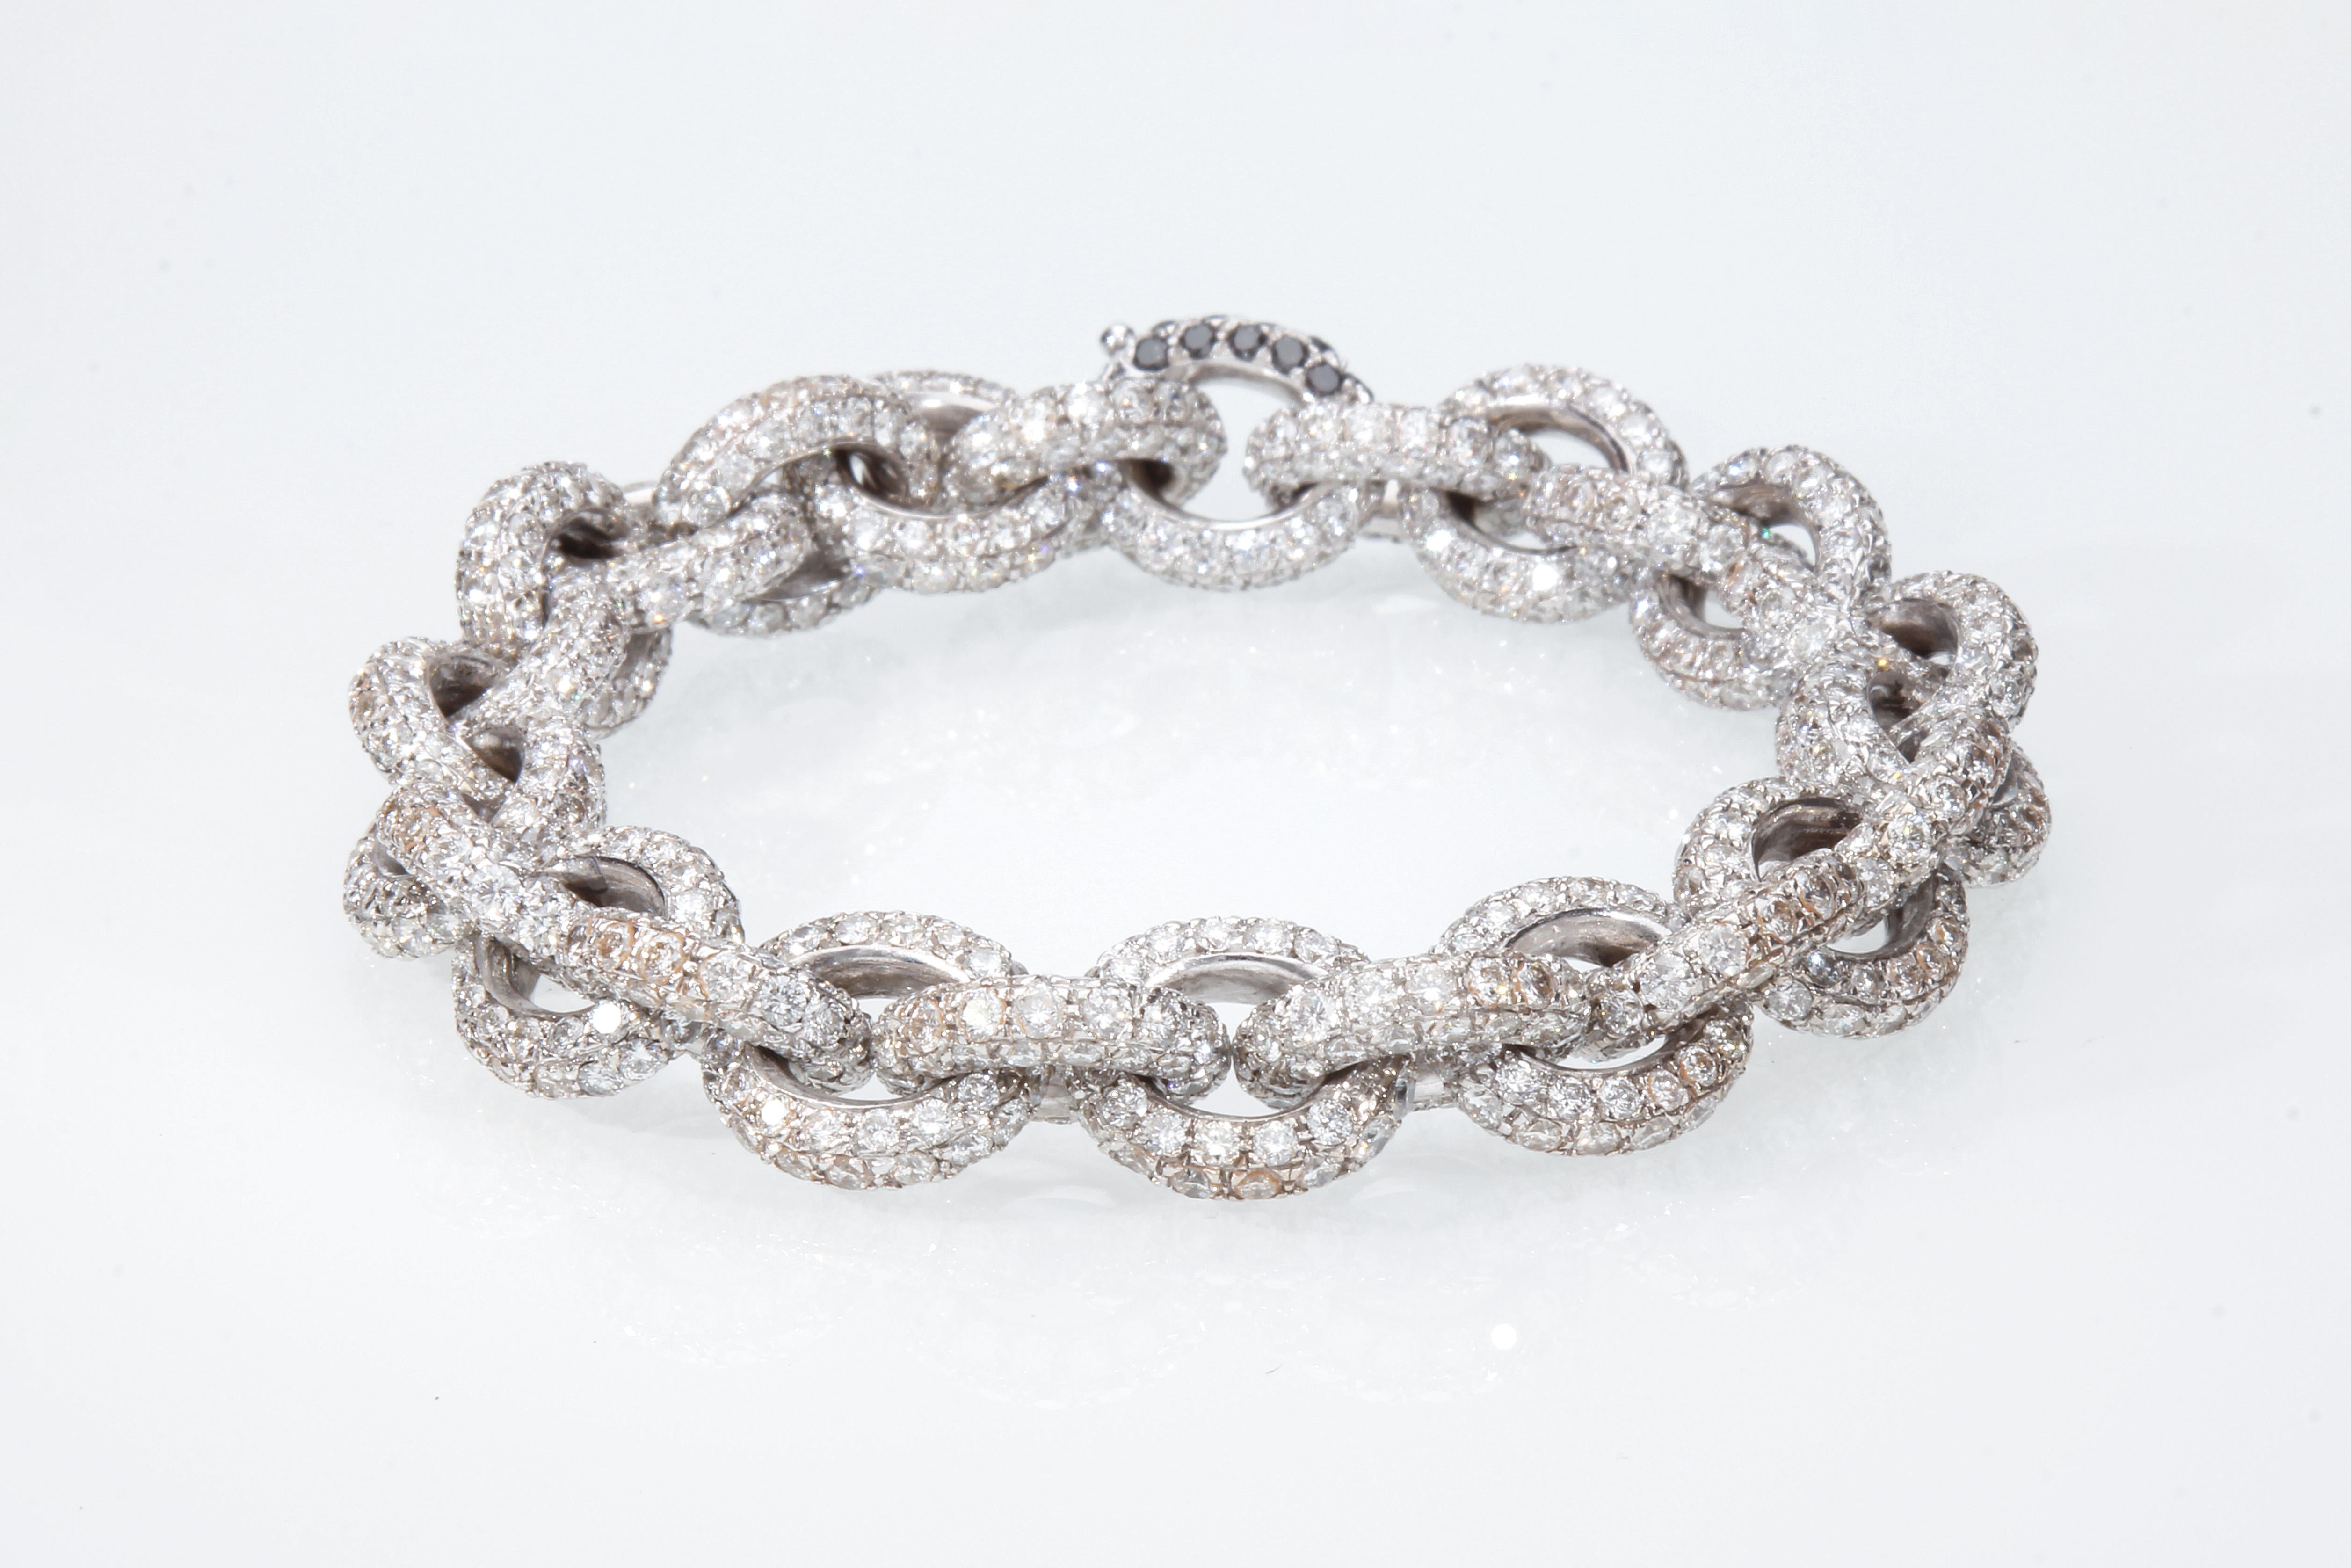 The bracelet is a chain model, and is made up of twenty-seven round links on which 30.76 ct of white diamonds are set. The bracelet is in 18 Kt white gold.
The closure of the bracelet is perfectly invisible, to be able to distinguish it, the